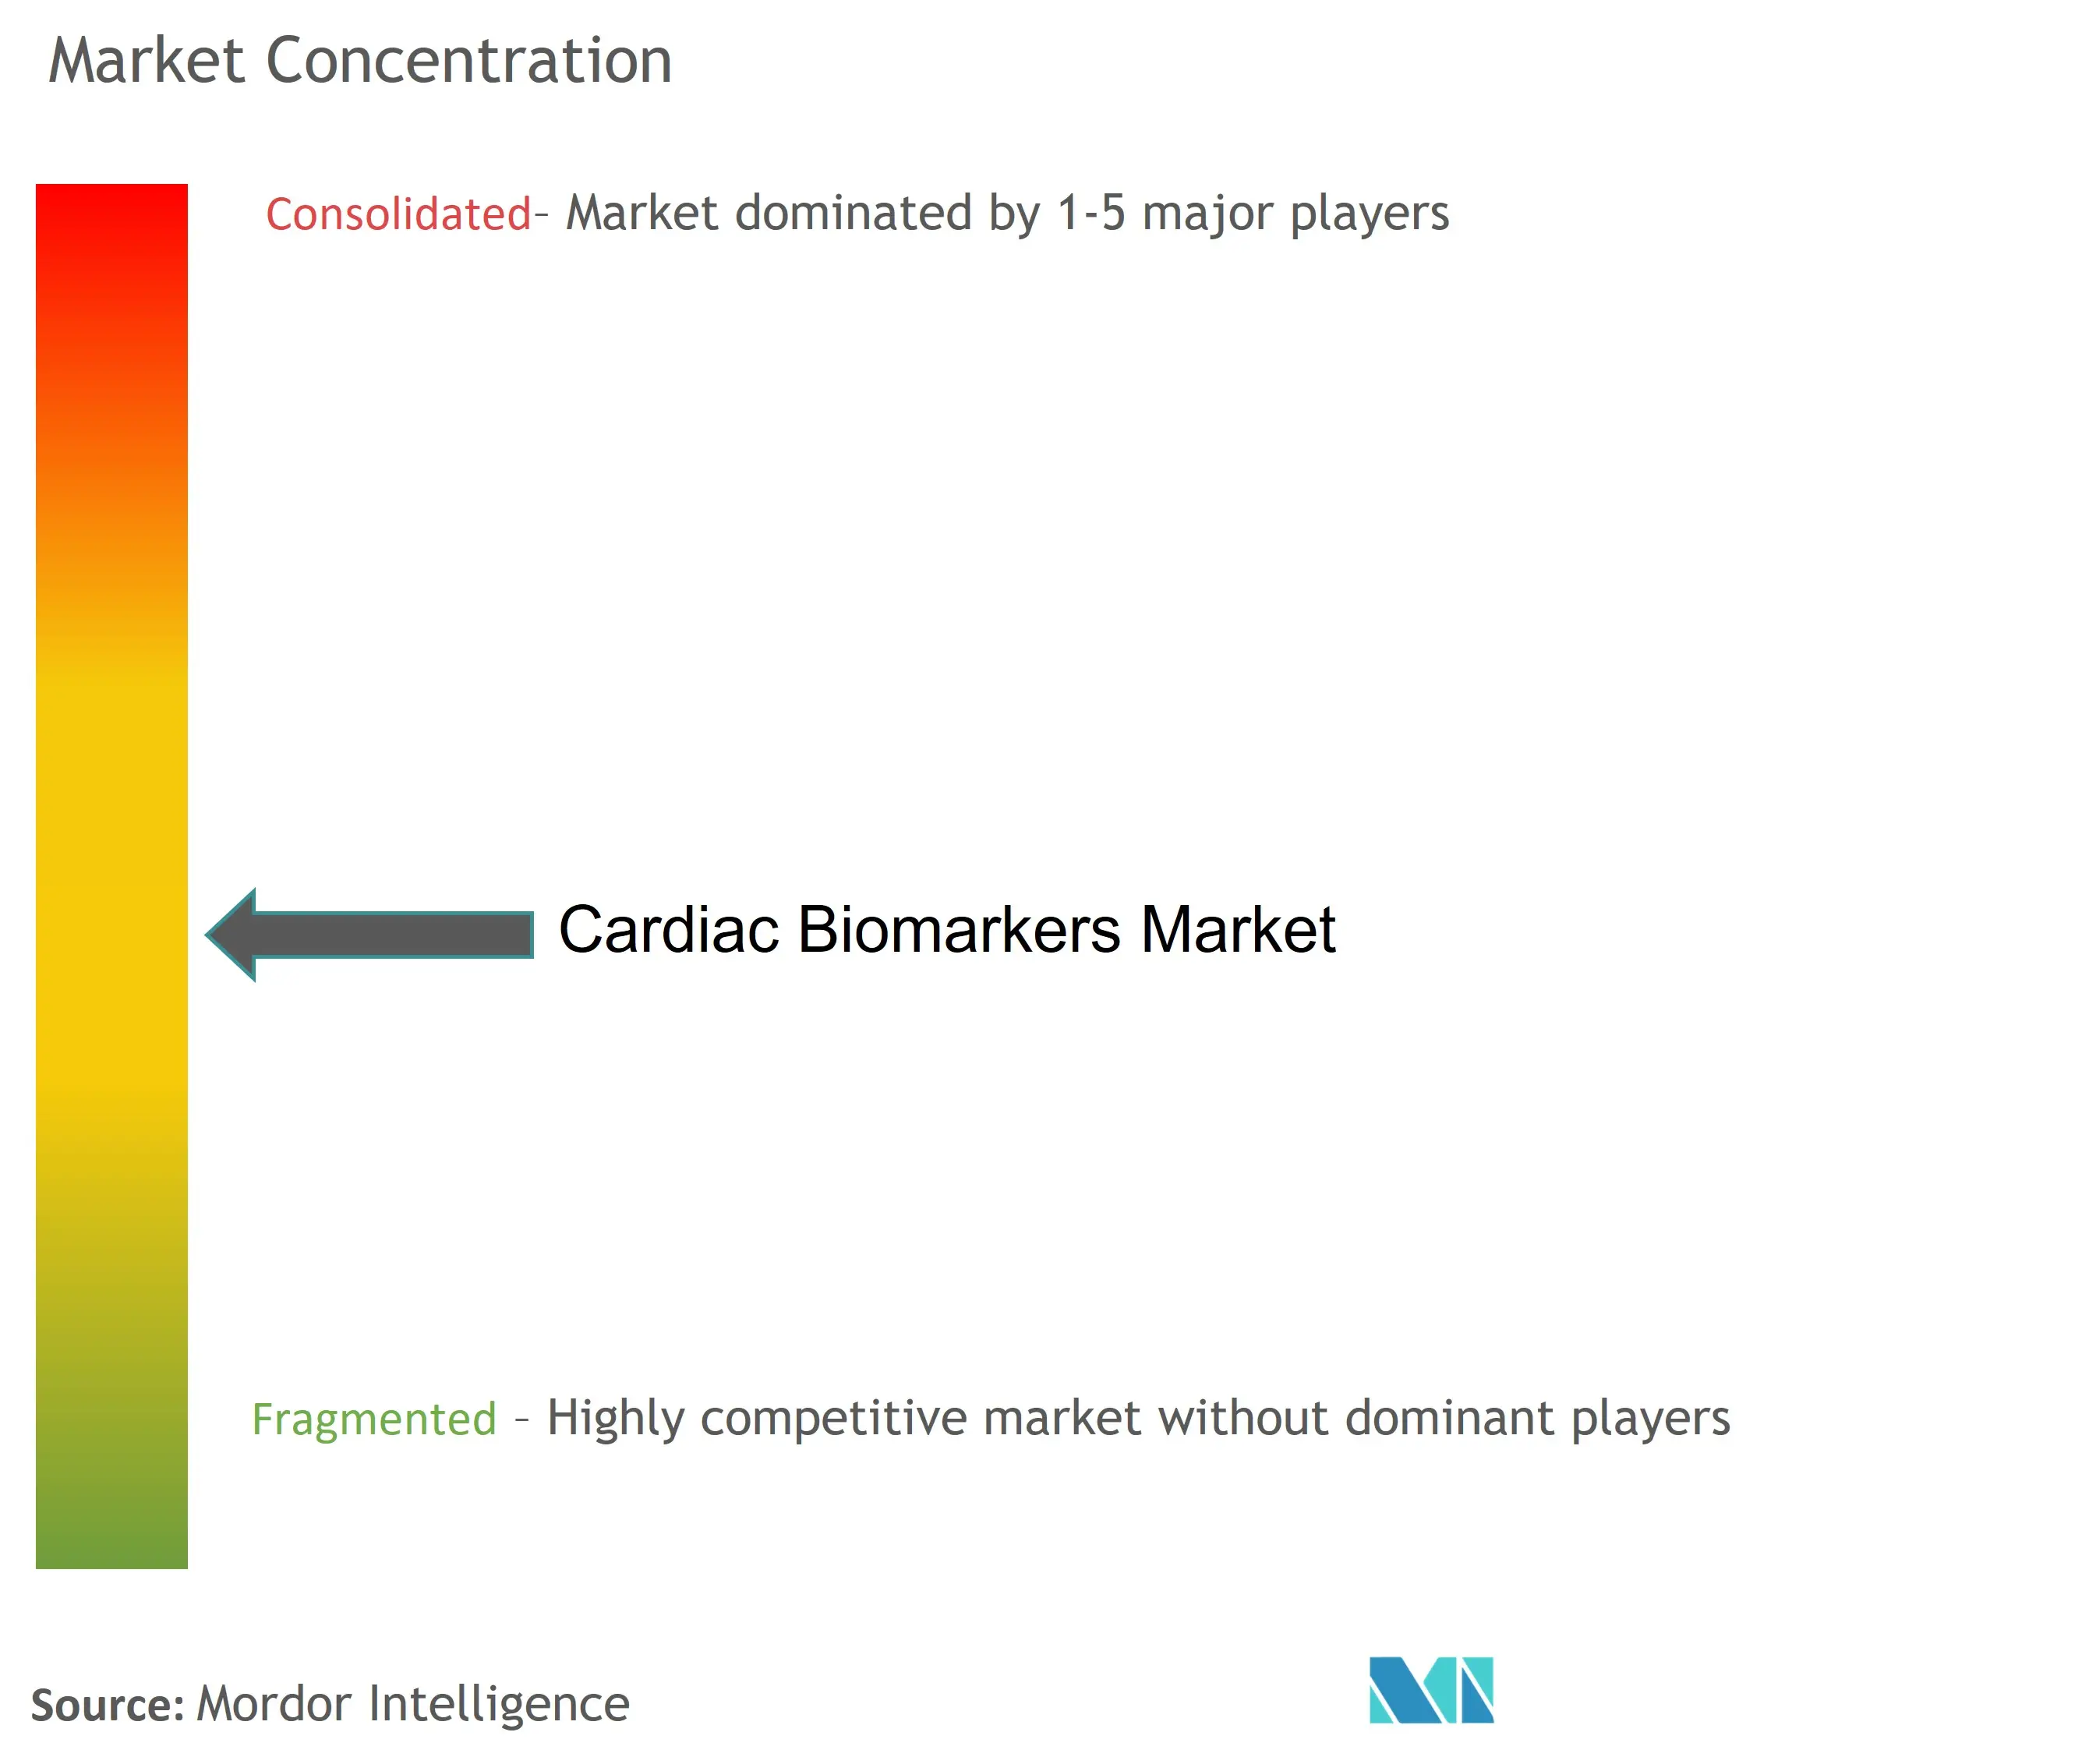 Cardiac Biomarkers Market Concentration